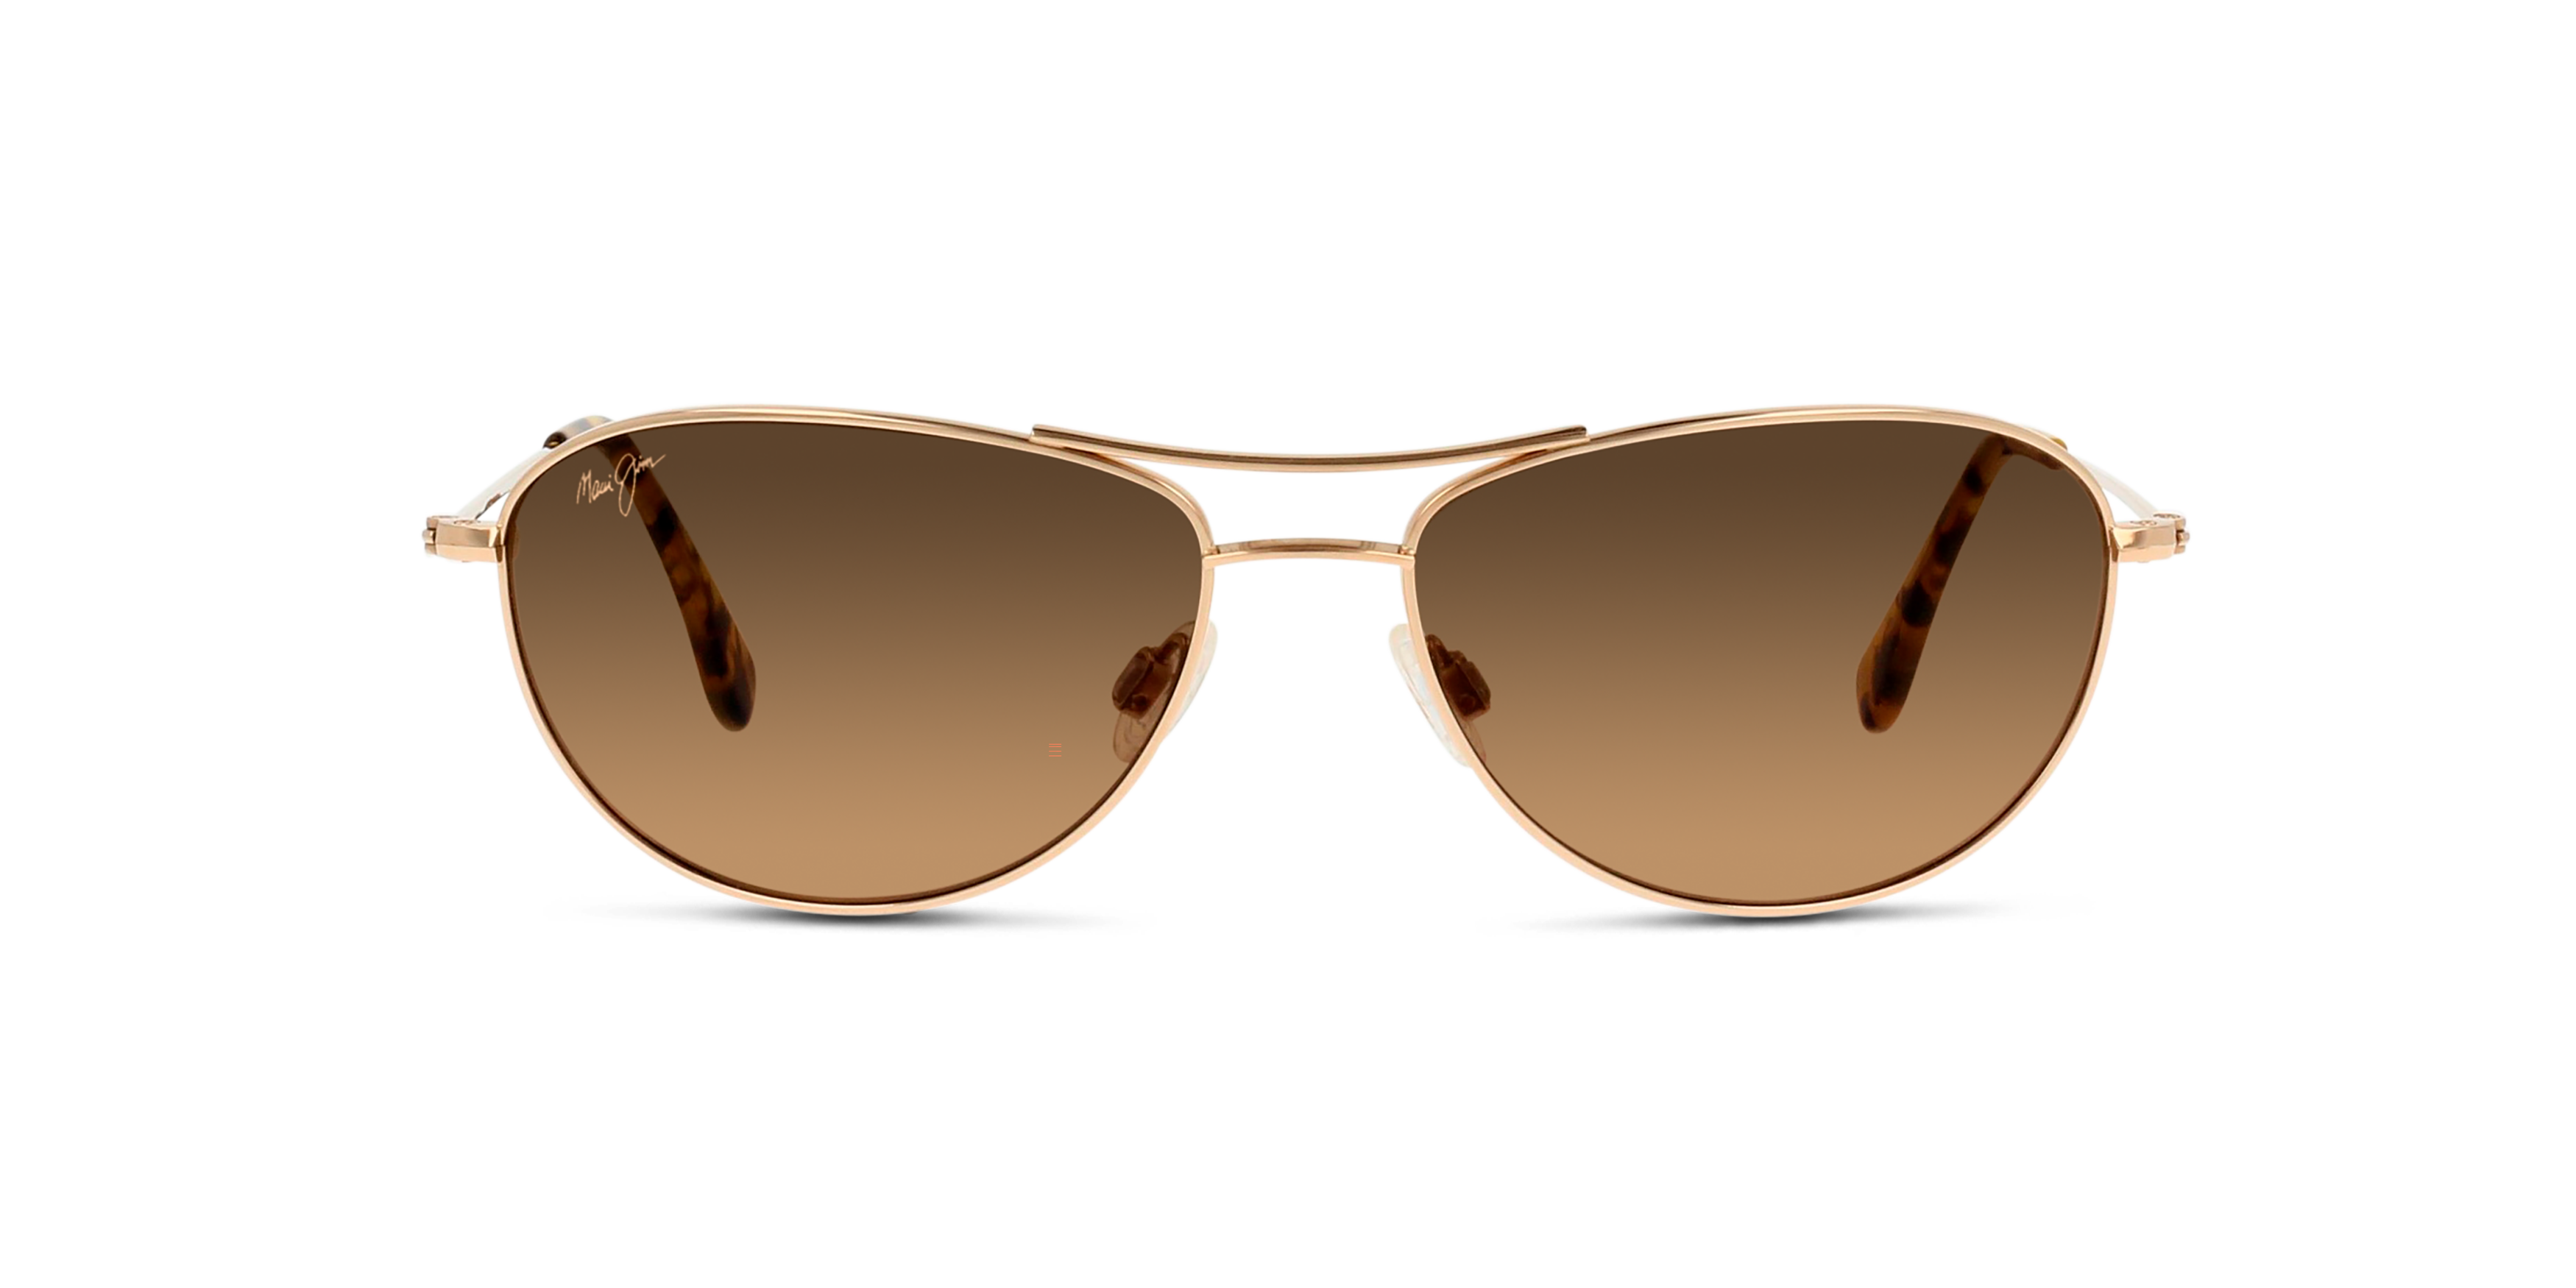 [products.image.front] MAUI JIM 245 Baby Beach 16